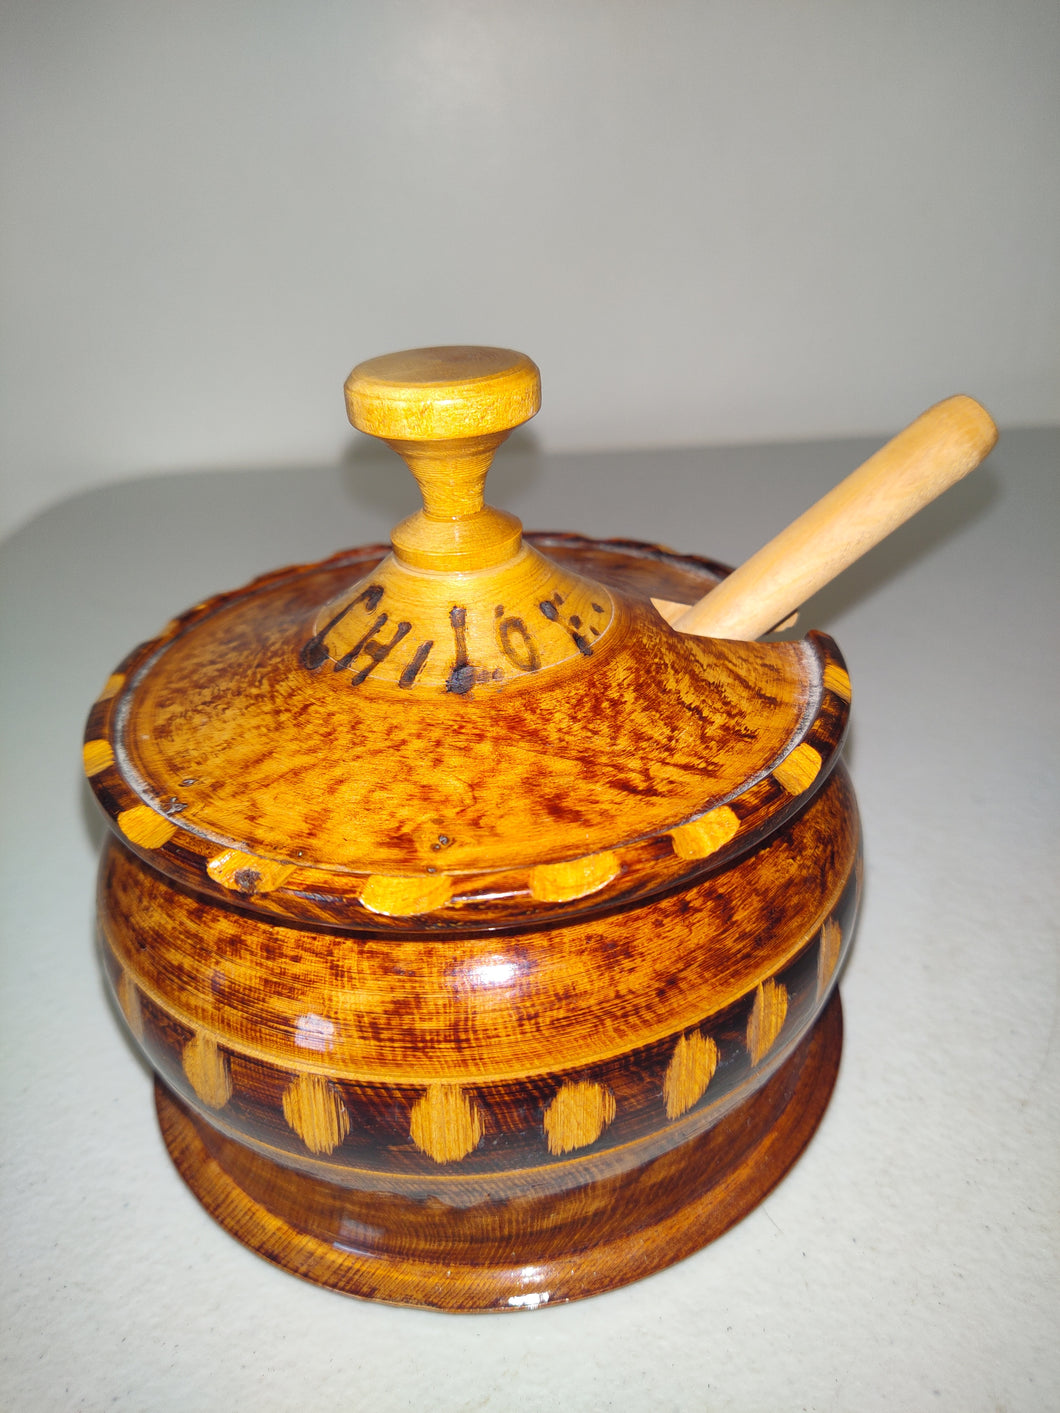 Vintage Handcrafted Wooden Sugar/Spice Bowl. Made In Chiloe